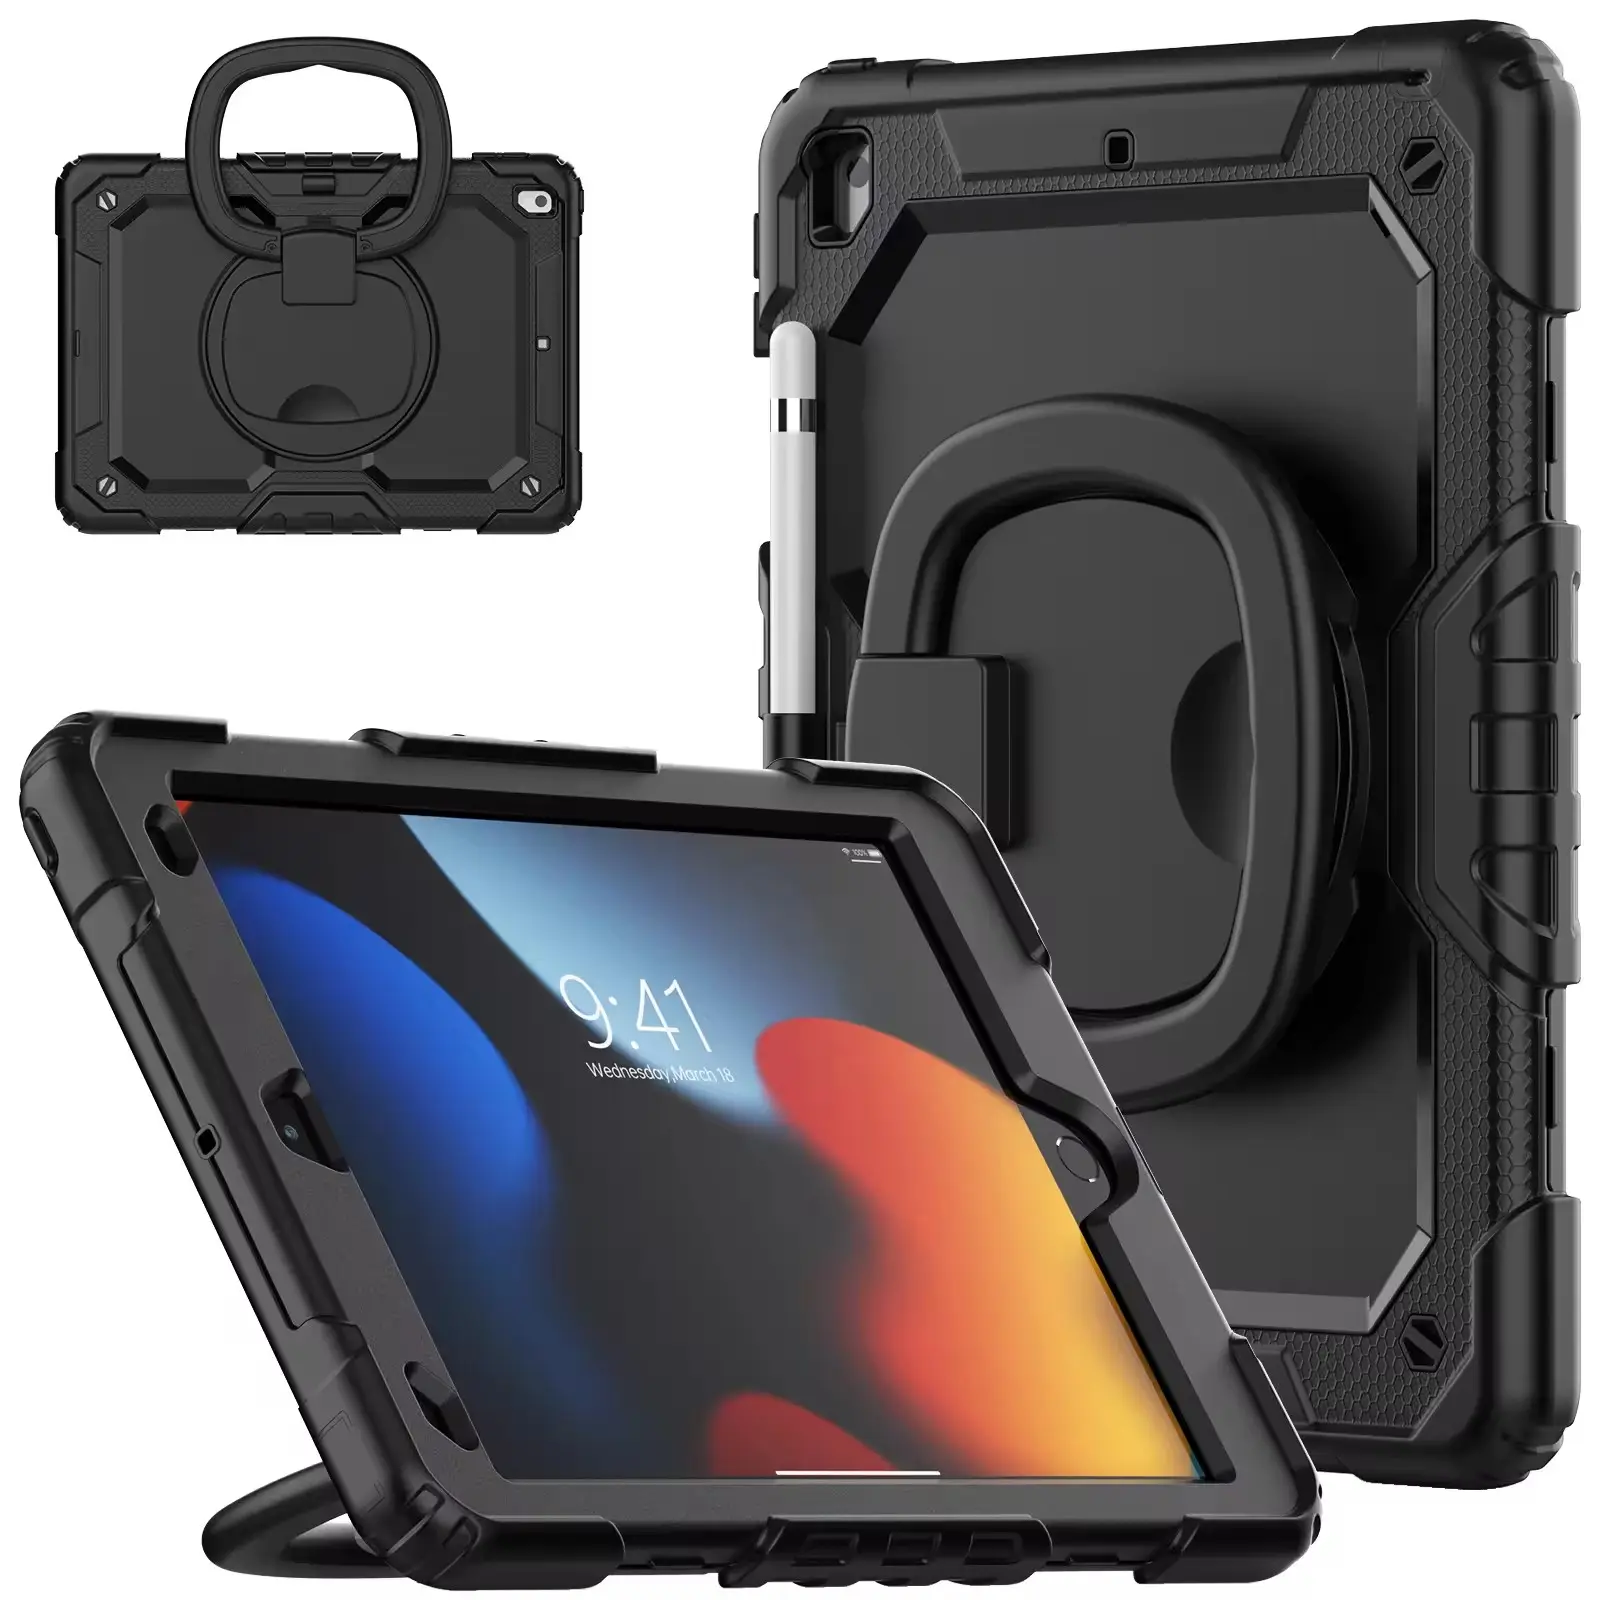 New Arrival Tablet Case For 12.9 10.2 Ipad 9th 8th 7th Generation Case With Shoulder Strap High Quality Dropshipping Products